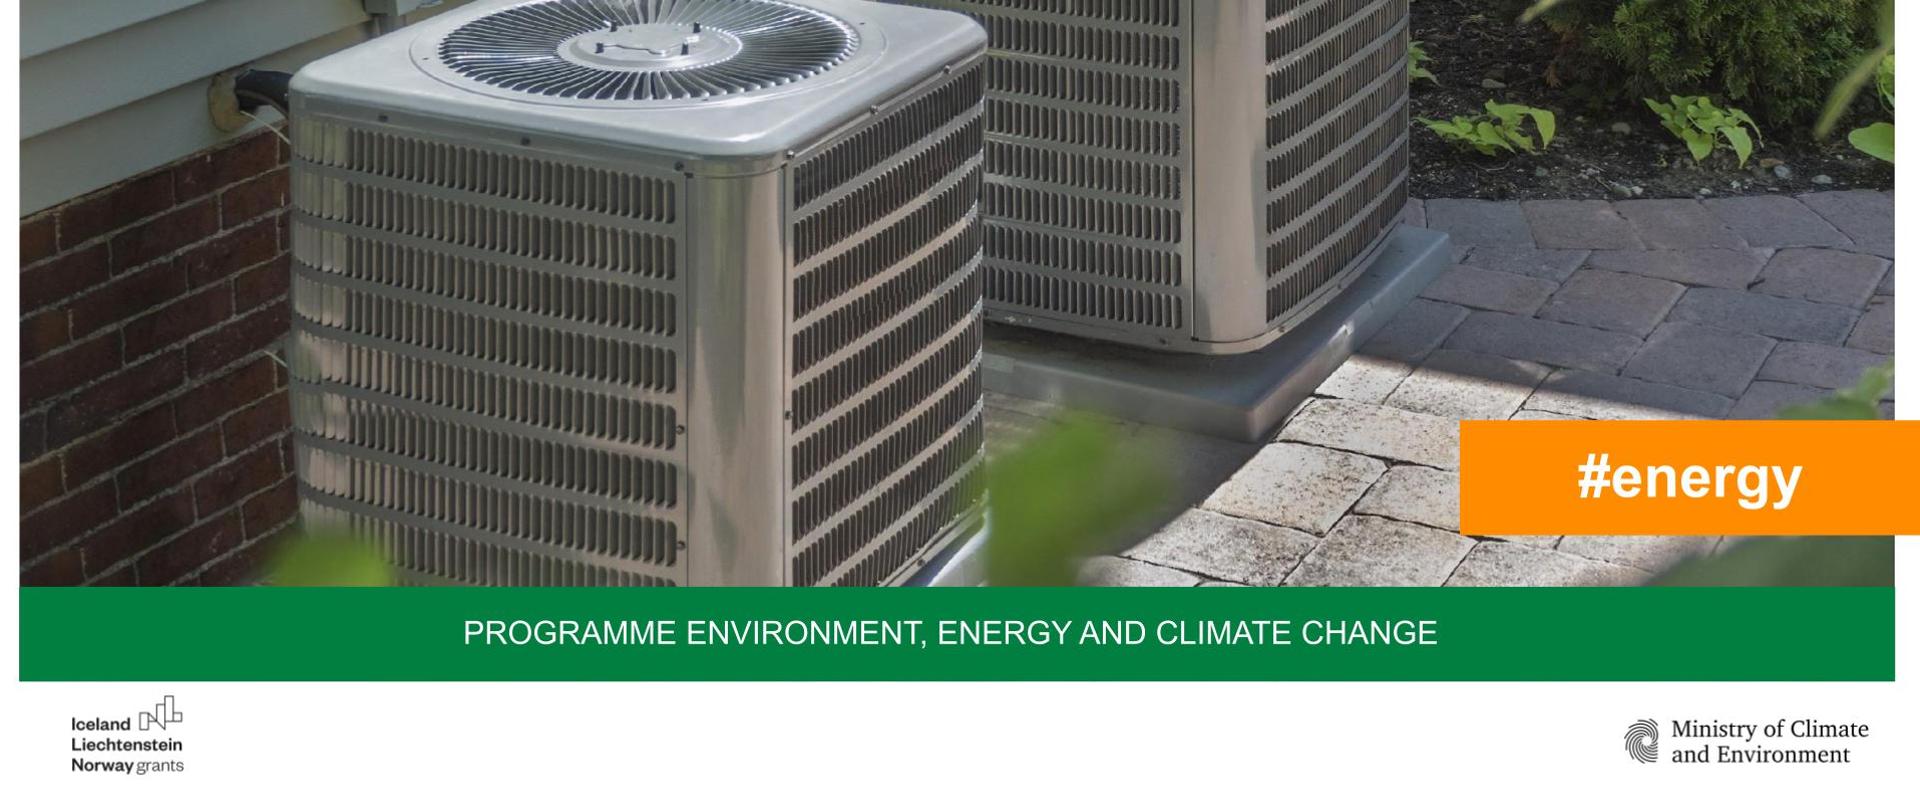 Environment Energy and Climate Change Programme - #energy cogeneration